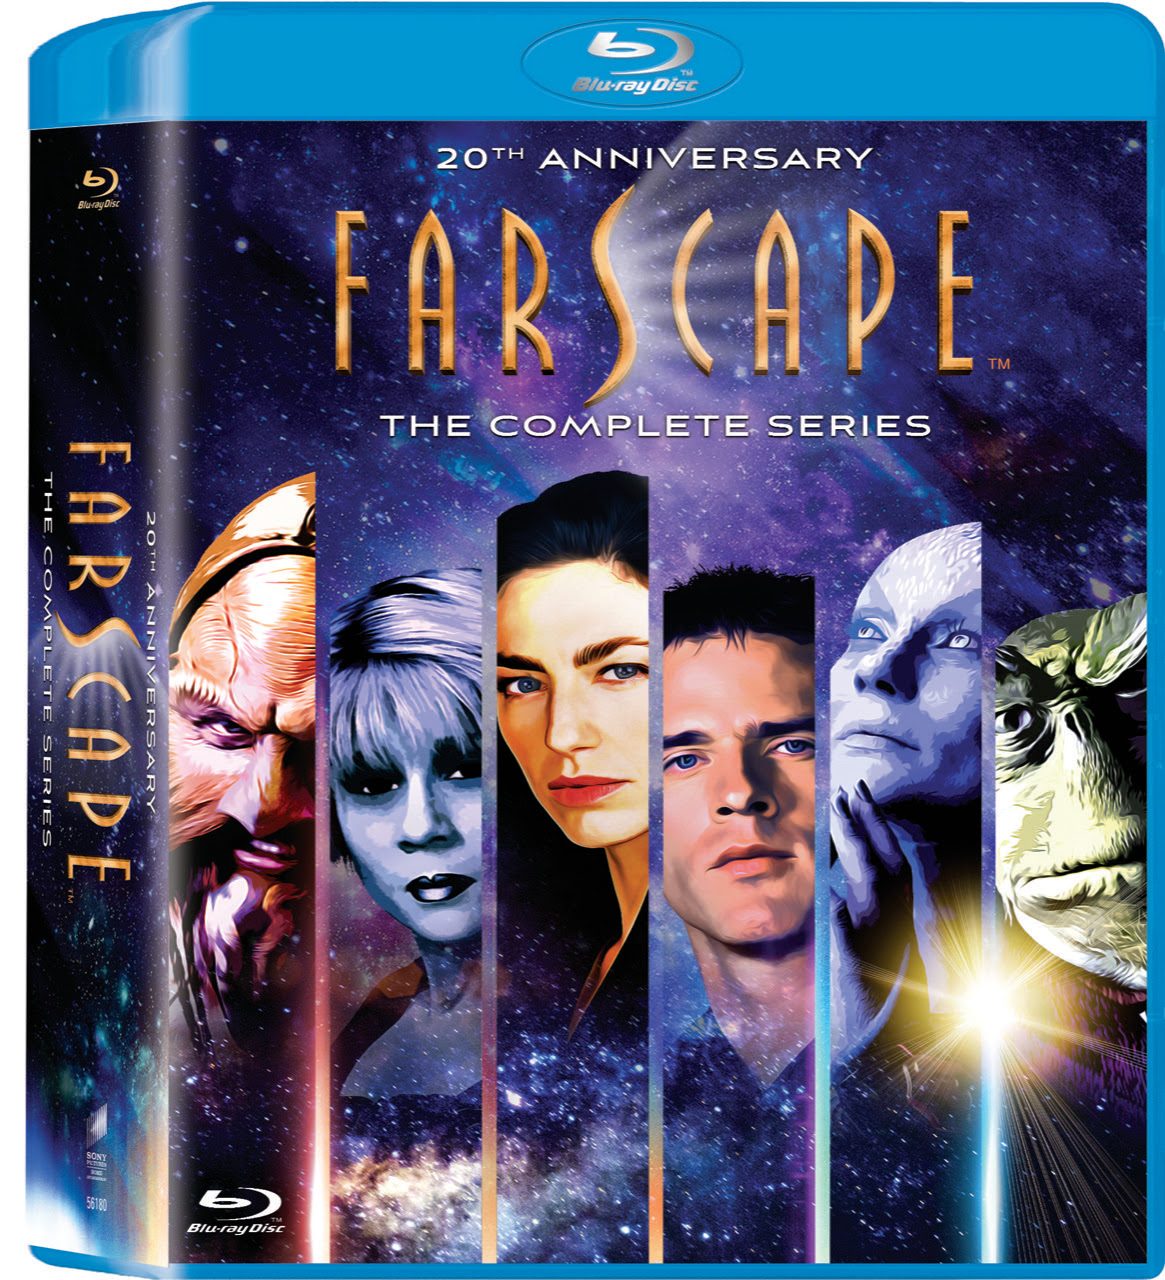 Farscape The Complete Series Blu-Ray cover (Sony Pictures Home Entertainment)